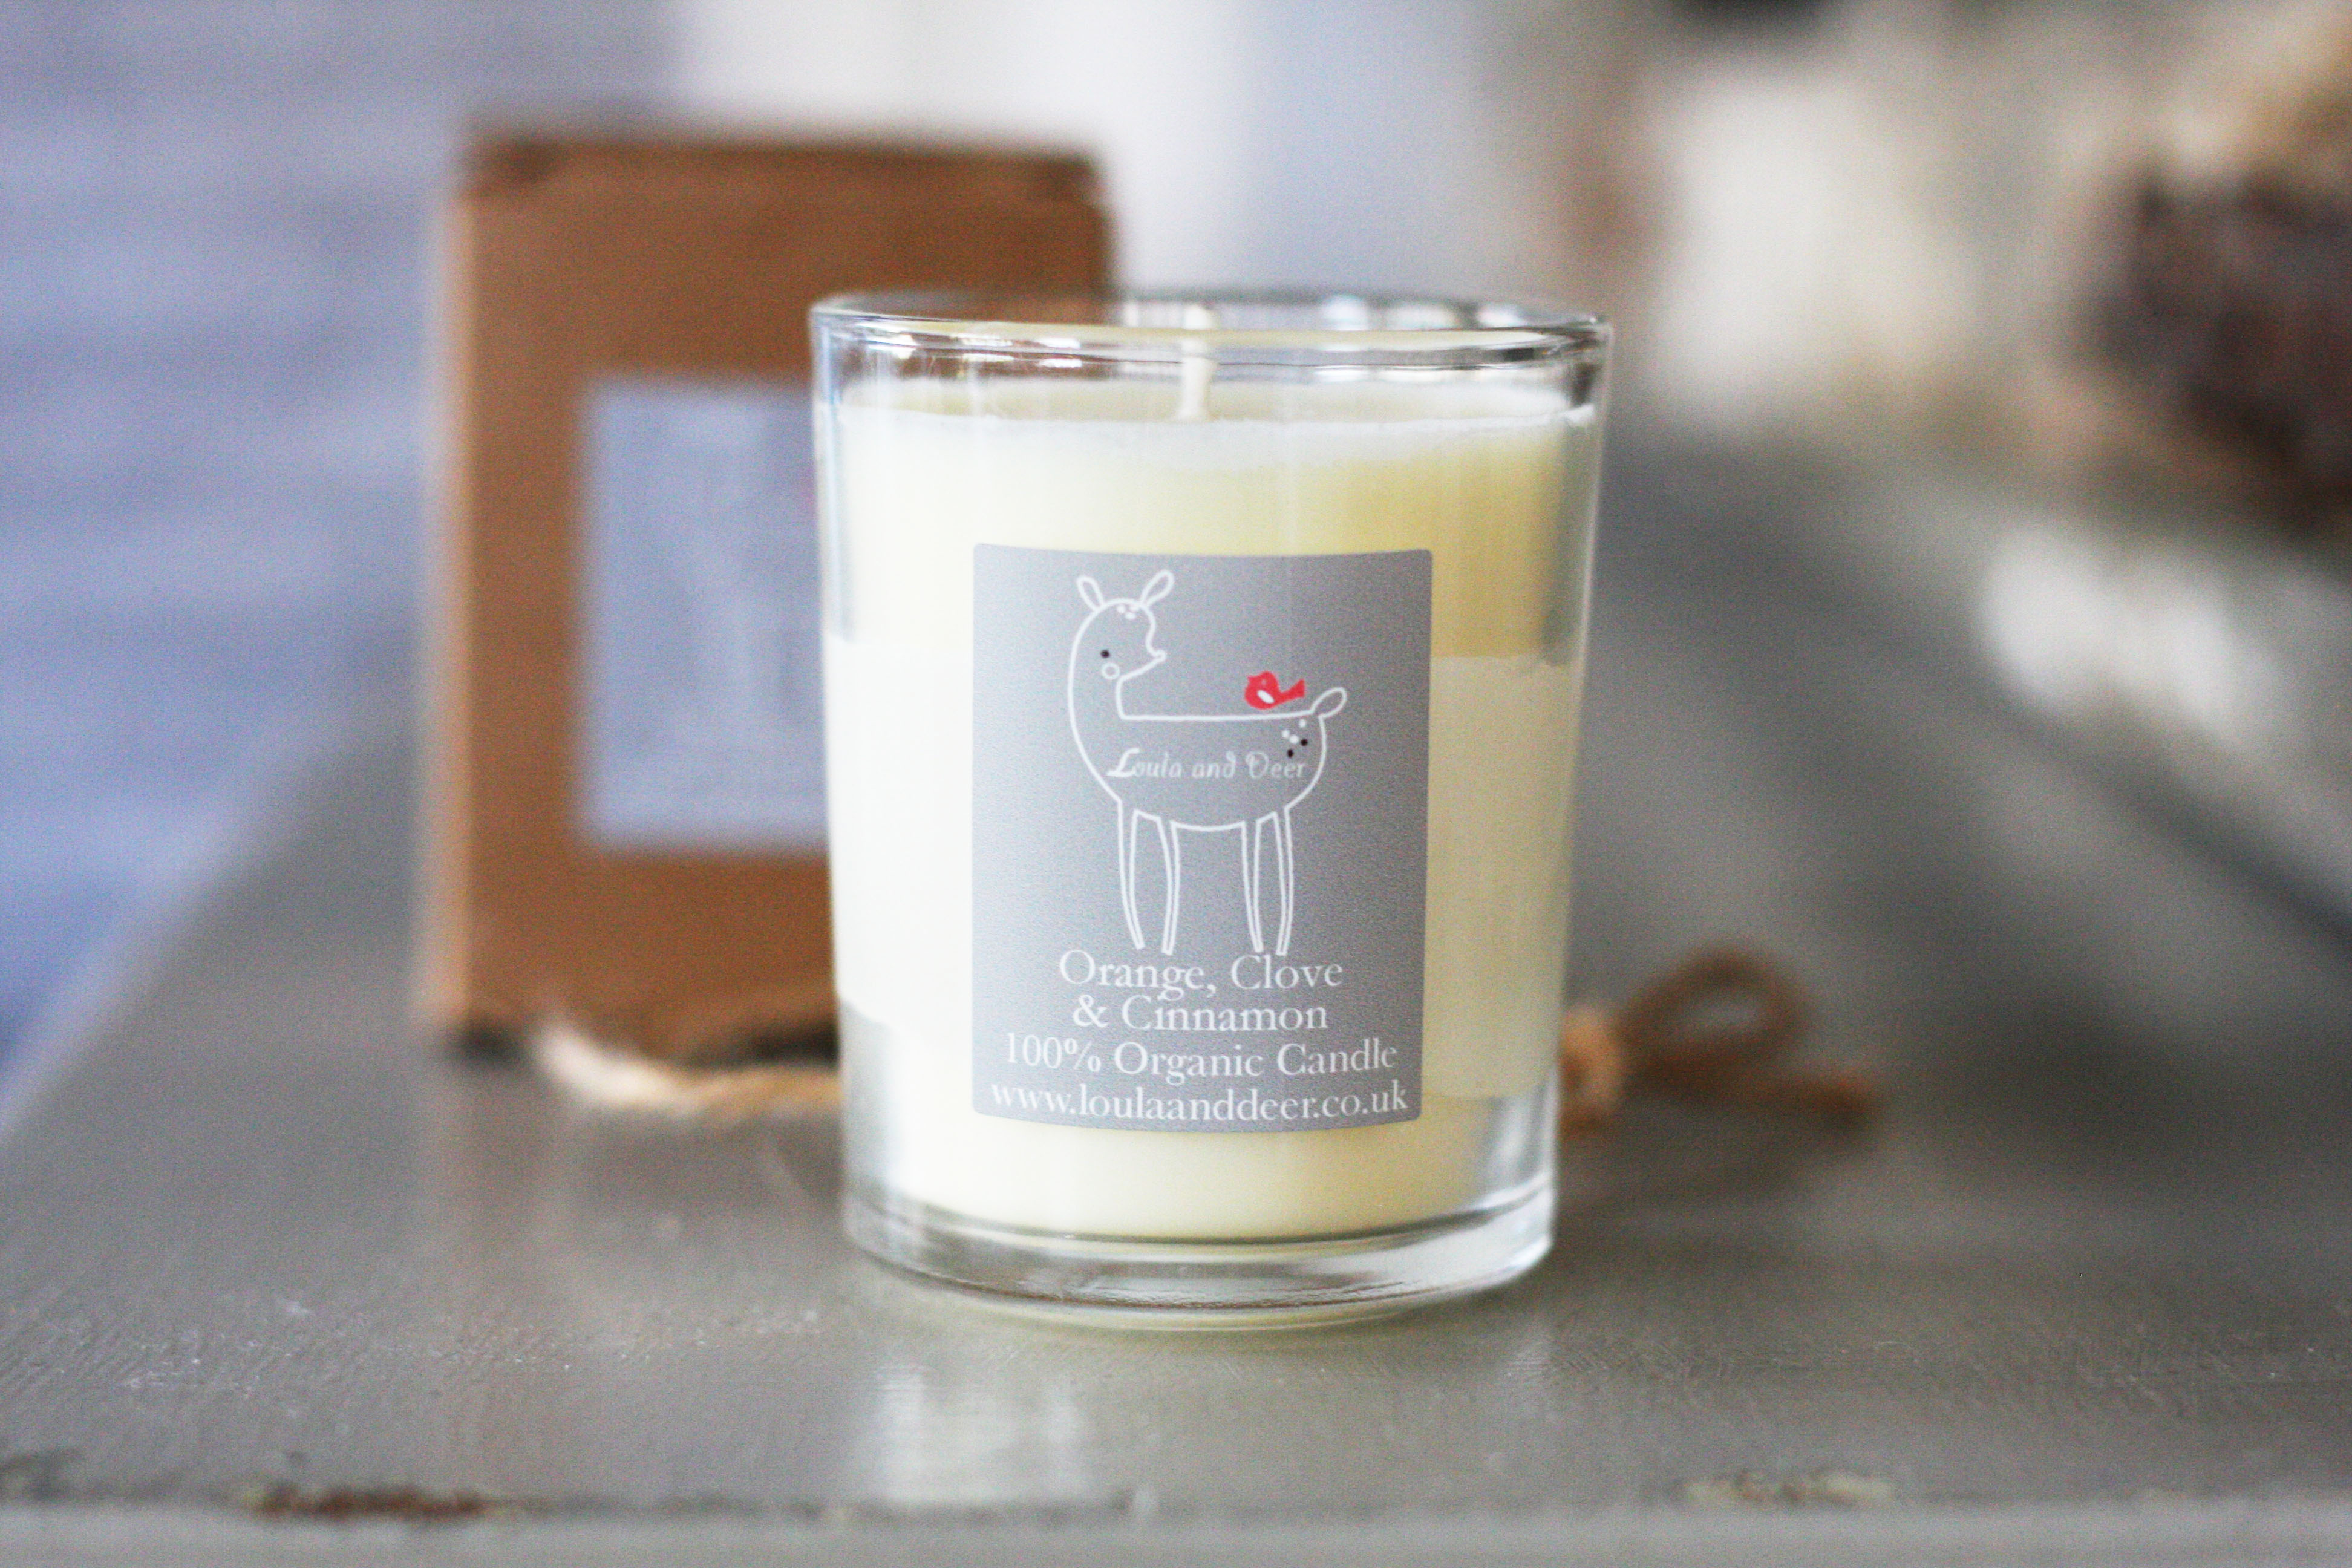 Loula and Deer Organic Scented Candles - Small